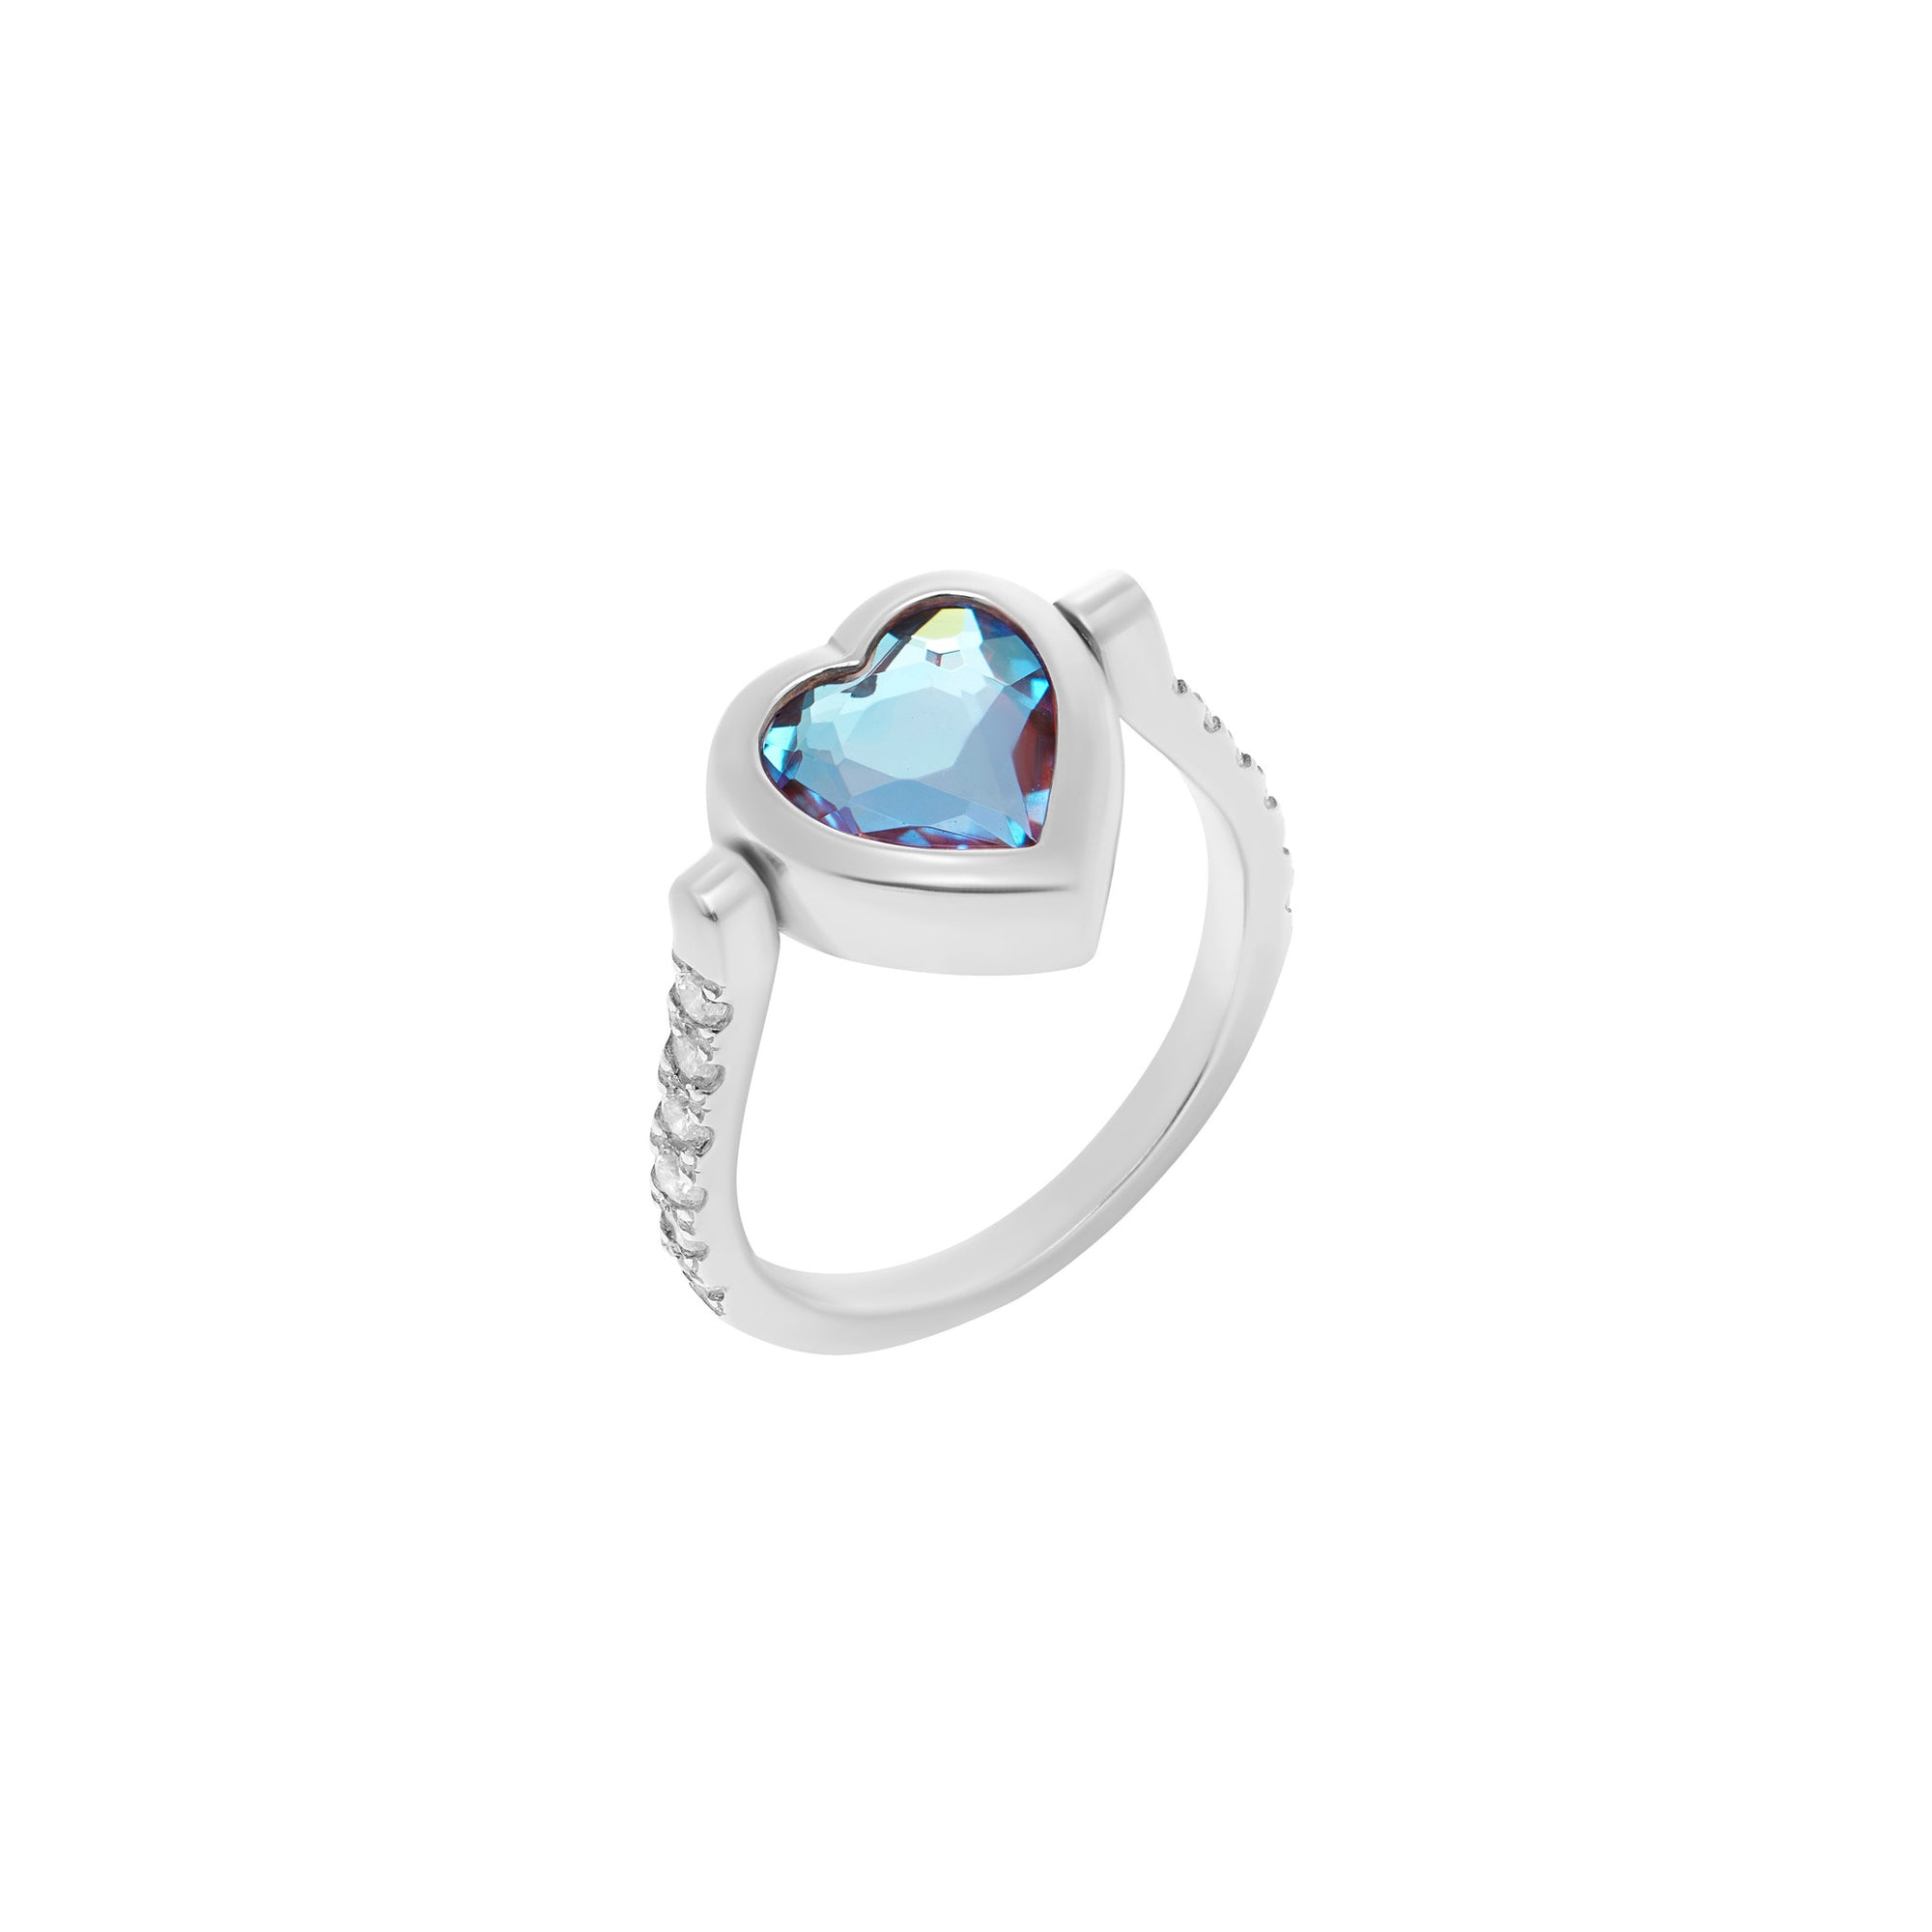 Ring 'Blue Mystic Eddy Heart' – You Are Loved